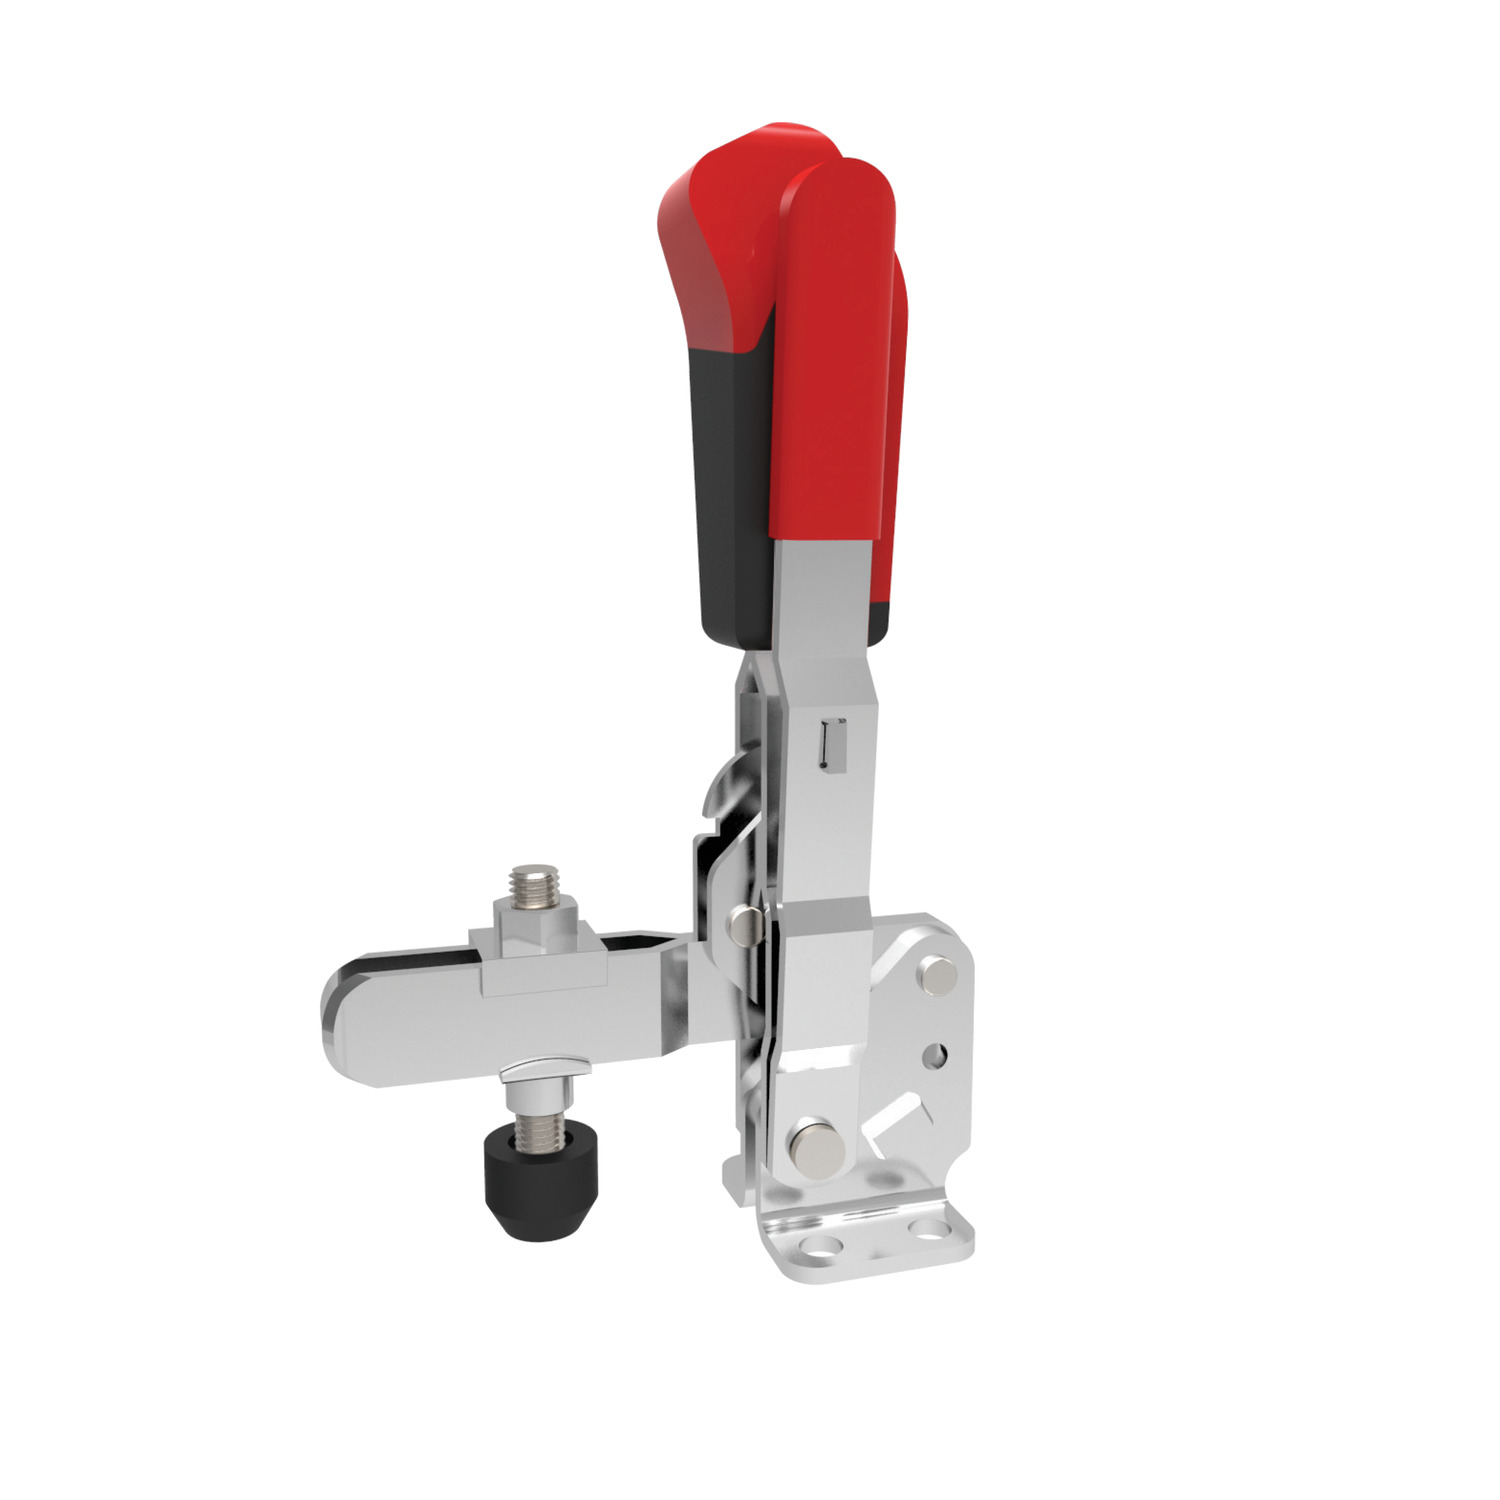 Vertical Acting Toggle Clamps Vertical acting toggle clamp with safety lever which holds the clamping arm in both the clamped and open position. Zinc plated steel body.